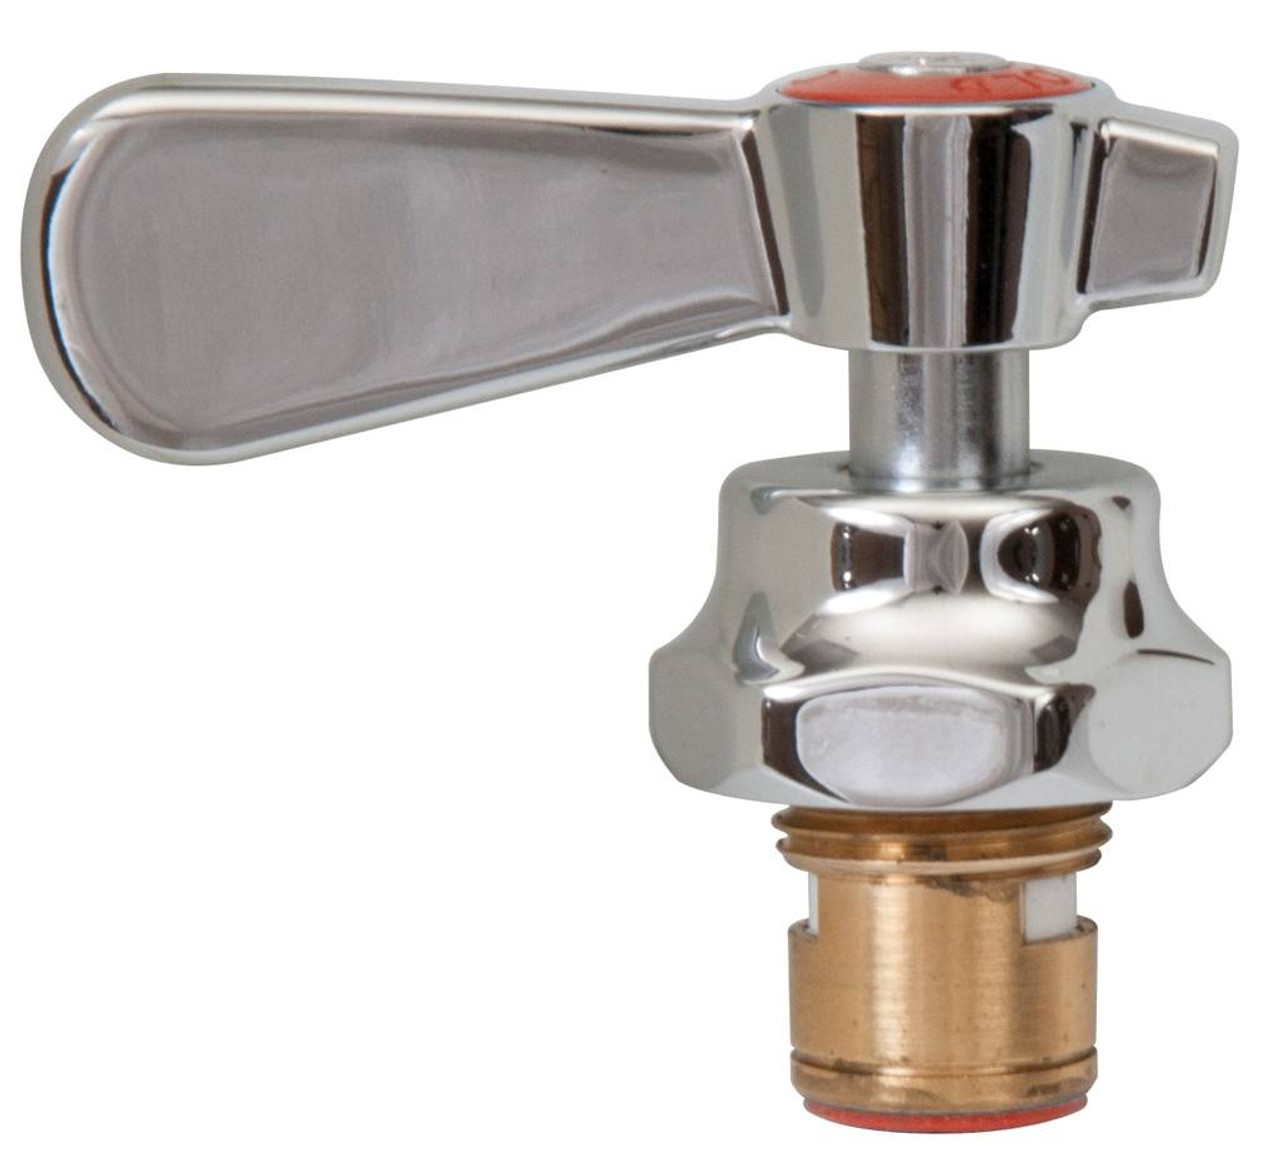 Bk Resources Bkf Hv Hb G Hot Water Ceramic Valve For Hd Faucet